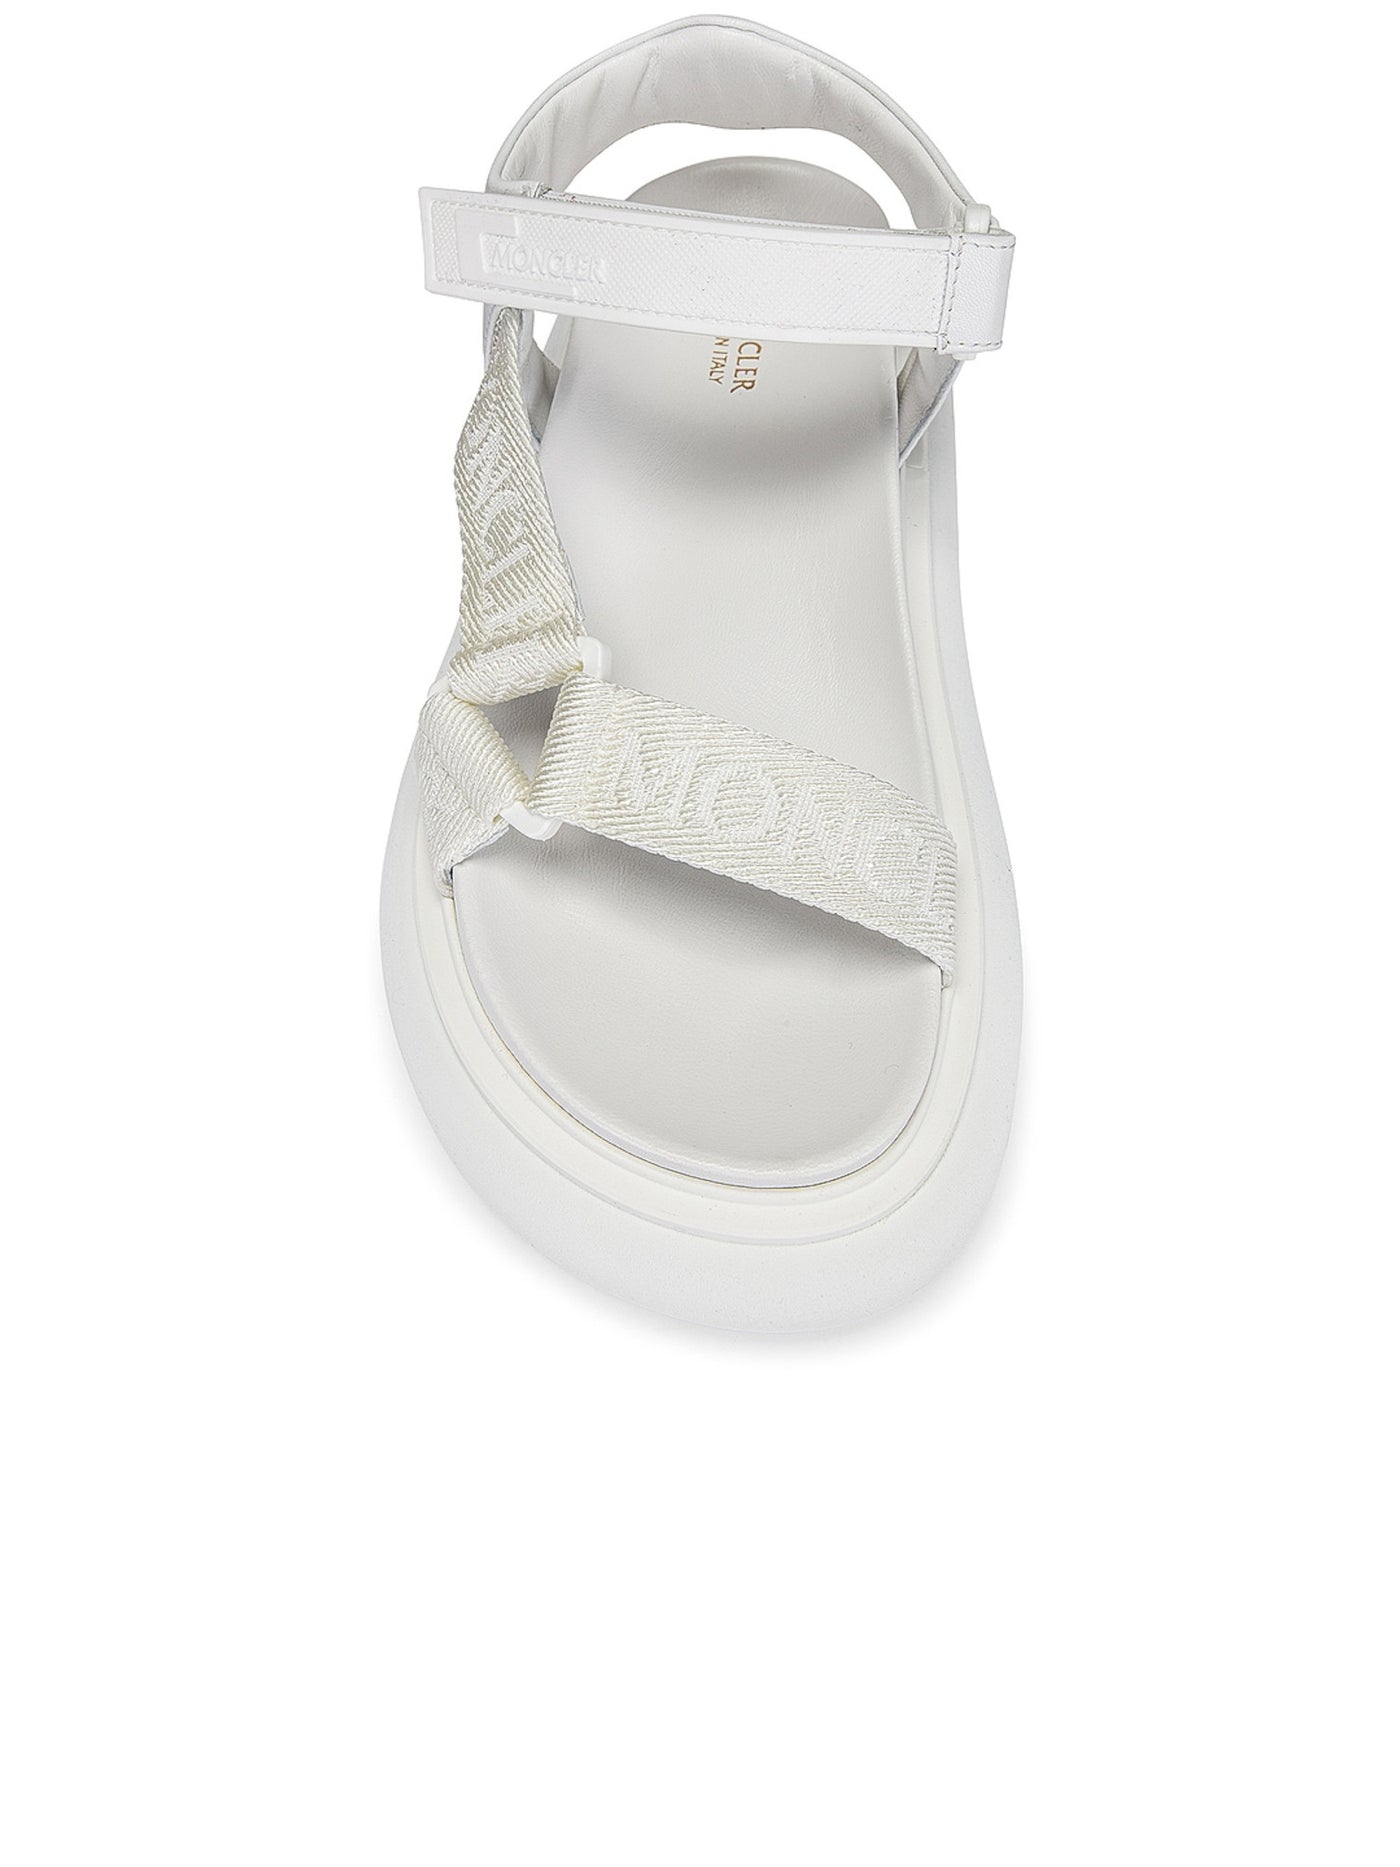 MONCLER Womens White Logo Asymmetrical Arch Support Catura Round Toe Wedge Leather Sandals Shoes